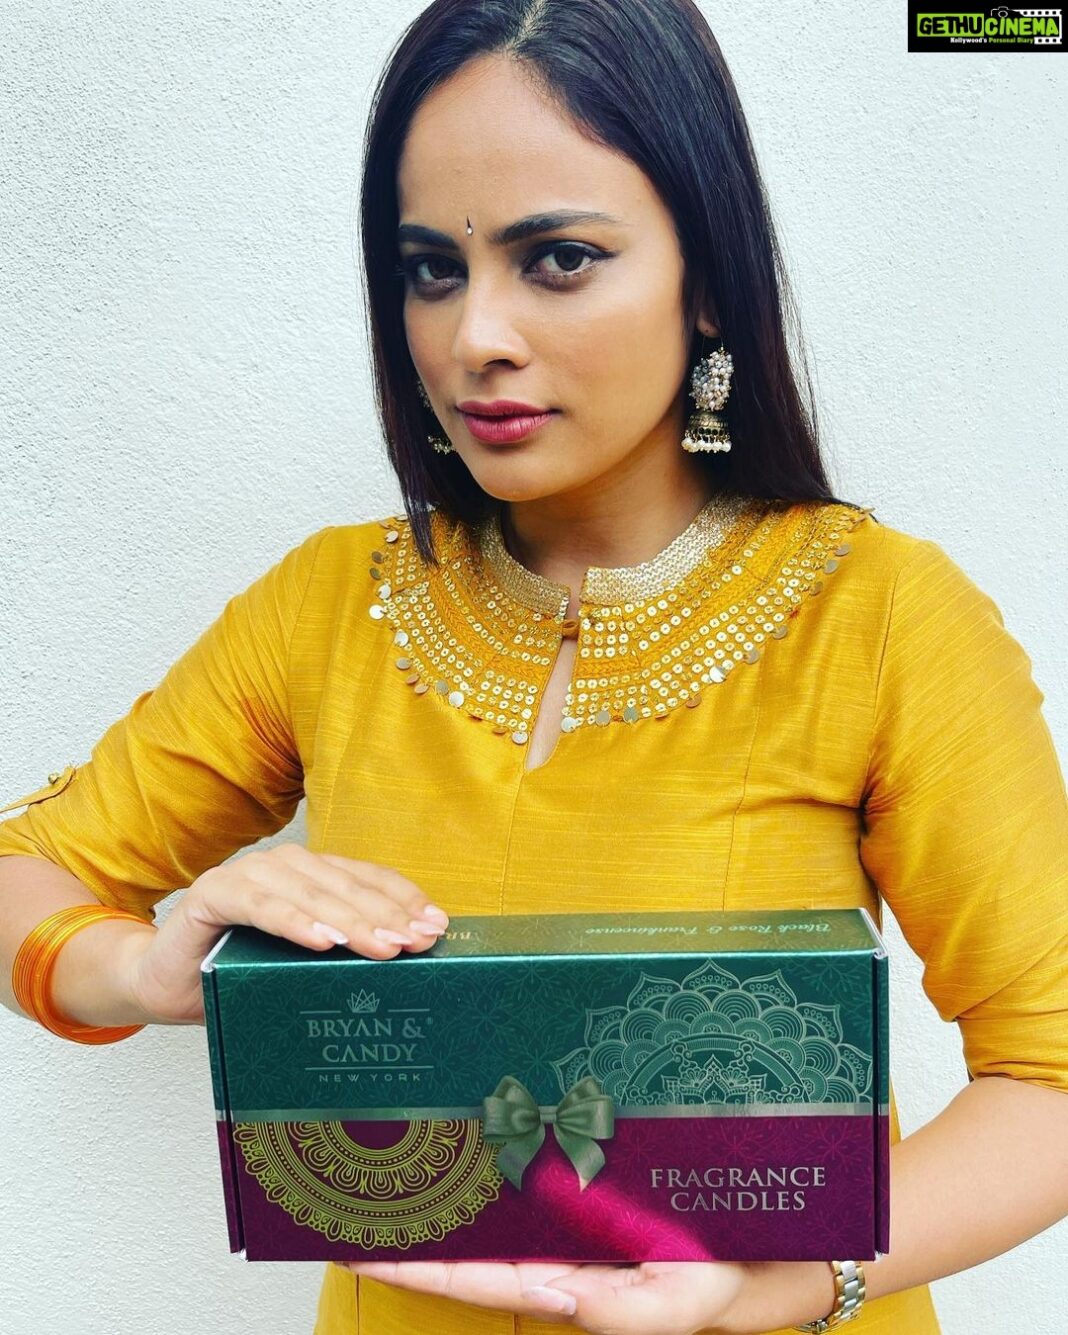 Nandita Swetha Instagram - Take your senses on a blissful journey as you enjoy the calming aromas of Bryan & Candy's new scented candle collection! 🌟Elegantly printed Tin containers 🌟100% Natural Soy Wax, Pure essential Oils 🌟Pure Cotton Wick 🌟18-28 Hours Burn Time 🌟Reusable Tin containers Bryan & Candy scented candles are the perfect choice for a festive celebration, yoga or meditation sessions, or simply for a leisurely bed and bath experience. The perfect gift for you and your loved ones for any occasion. Add a divine fragrance to your celebrations! Shop now. #fragrance #homefragrance #luxurycandles #candles #soycandles #soywax #Bryanandcandy #bryanandcandy #BnCCandle #candle #candles #Gift #DiwaliGifting #Diwali #DiwaliGifts #Diwali2021 #Diwalihampers #diwalihamper #candlelover #candleaddict #candlesofinstagram #handmadecandles #collaboration Bangalore, India